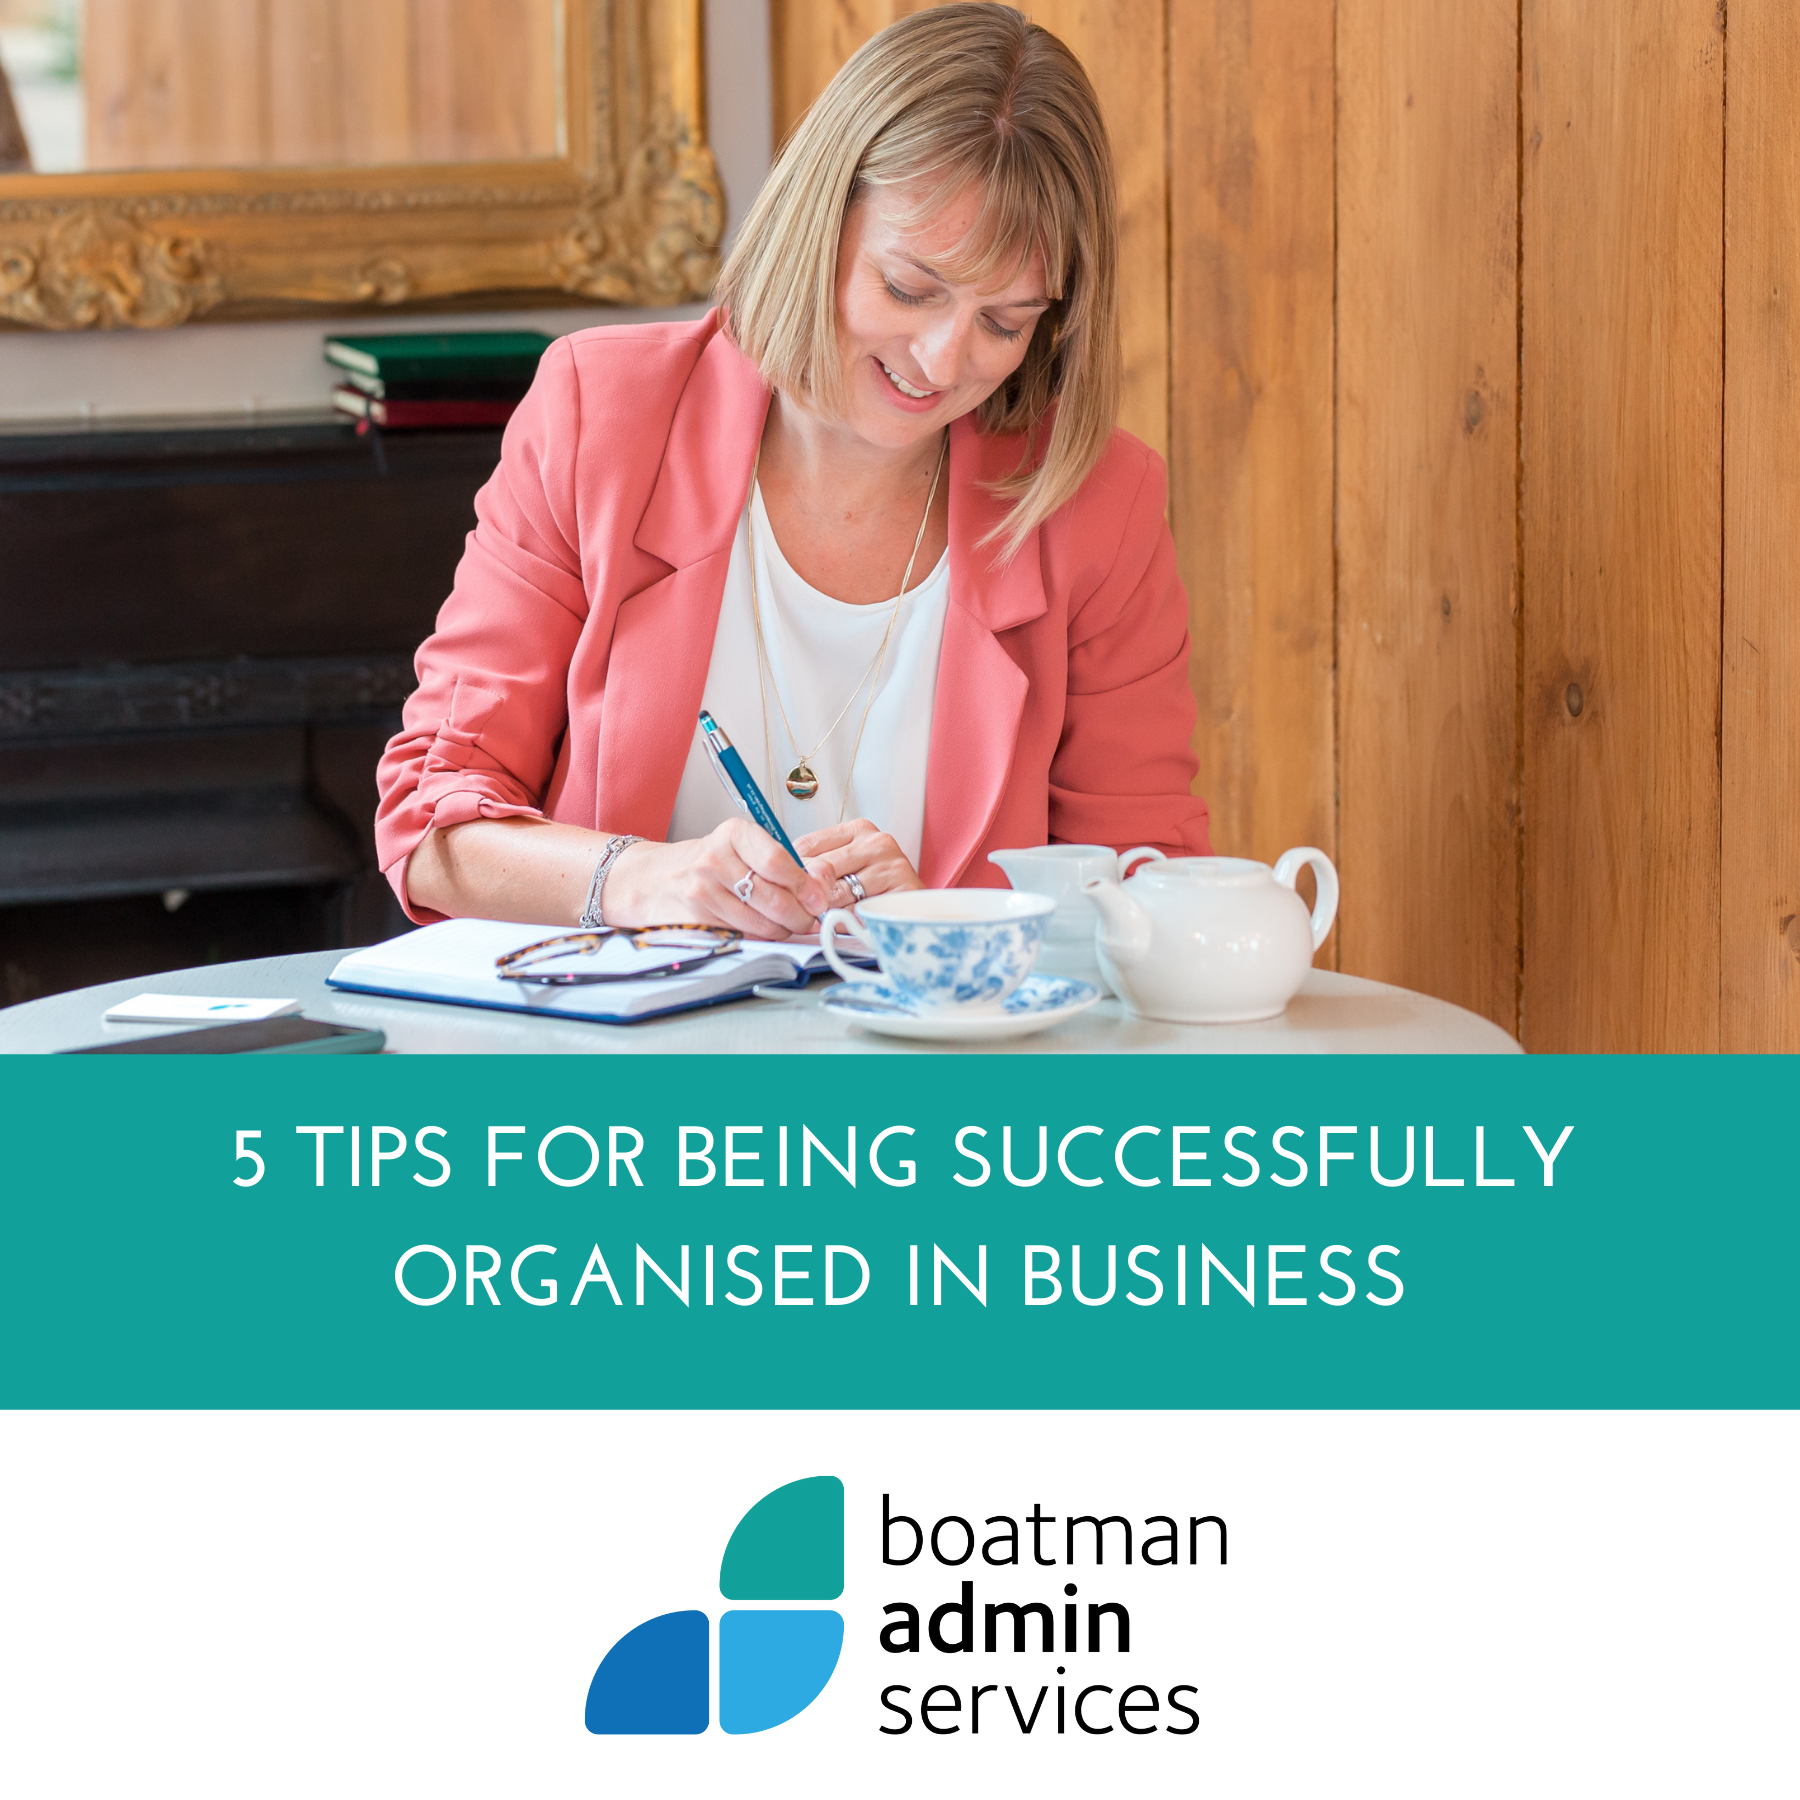 5 tips for being successfully organised in business